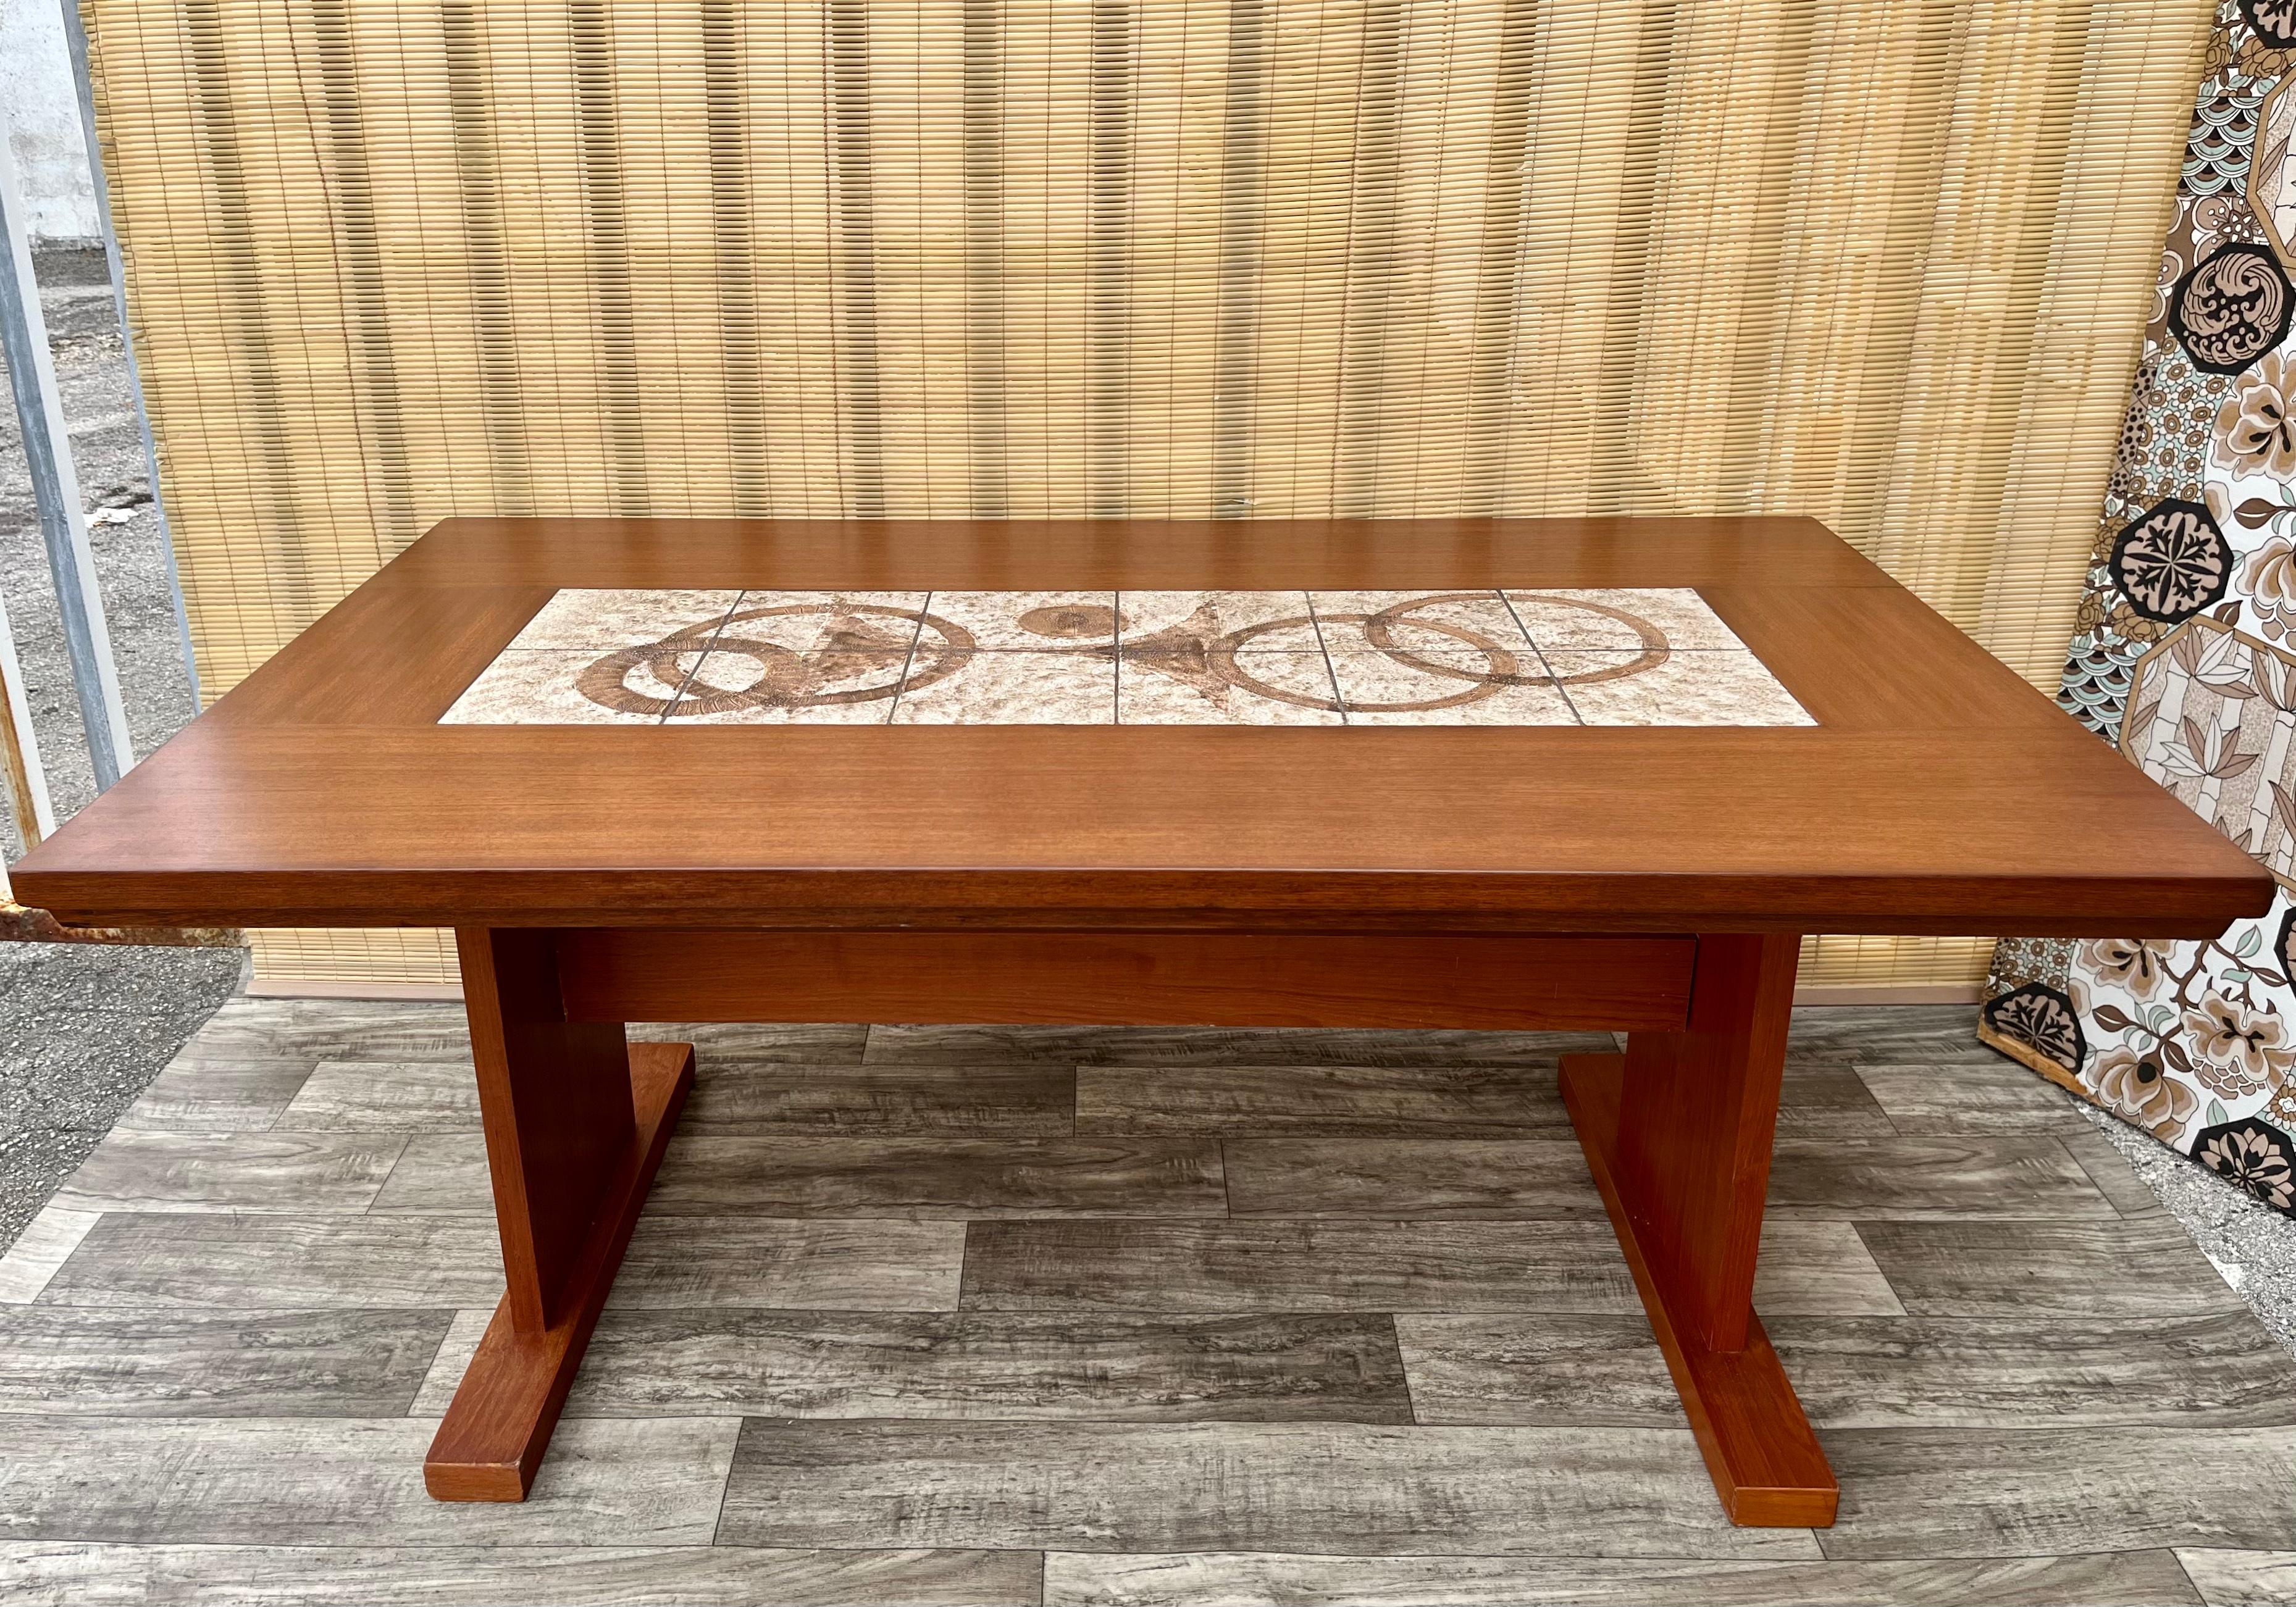 Vintage Mid Century Modern Danish Dining Table With Ceramic Tile Inlay. Circa 1970s
Features quintessential Mid Century Modern Scandinavian design with a brutalist ceramic tile inlay top. 
Comfortably seat six guests. 
In excellent refinished